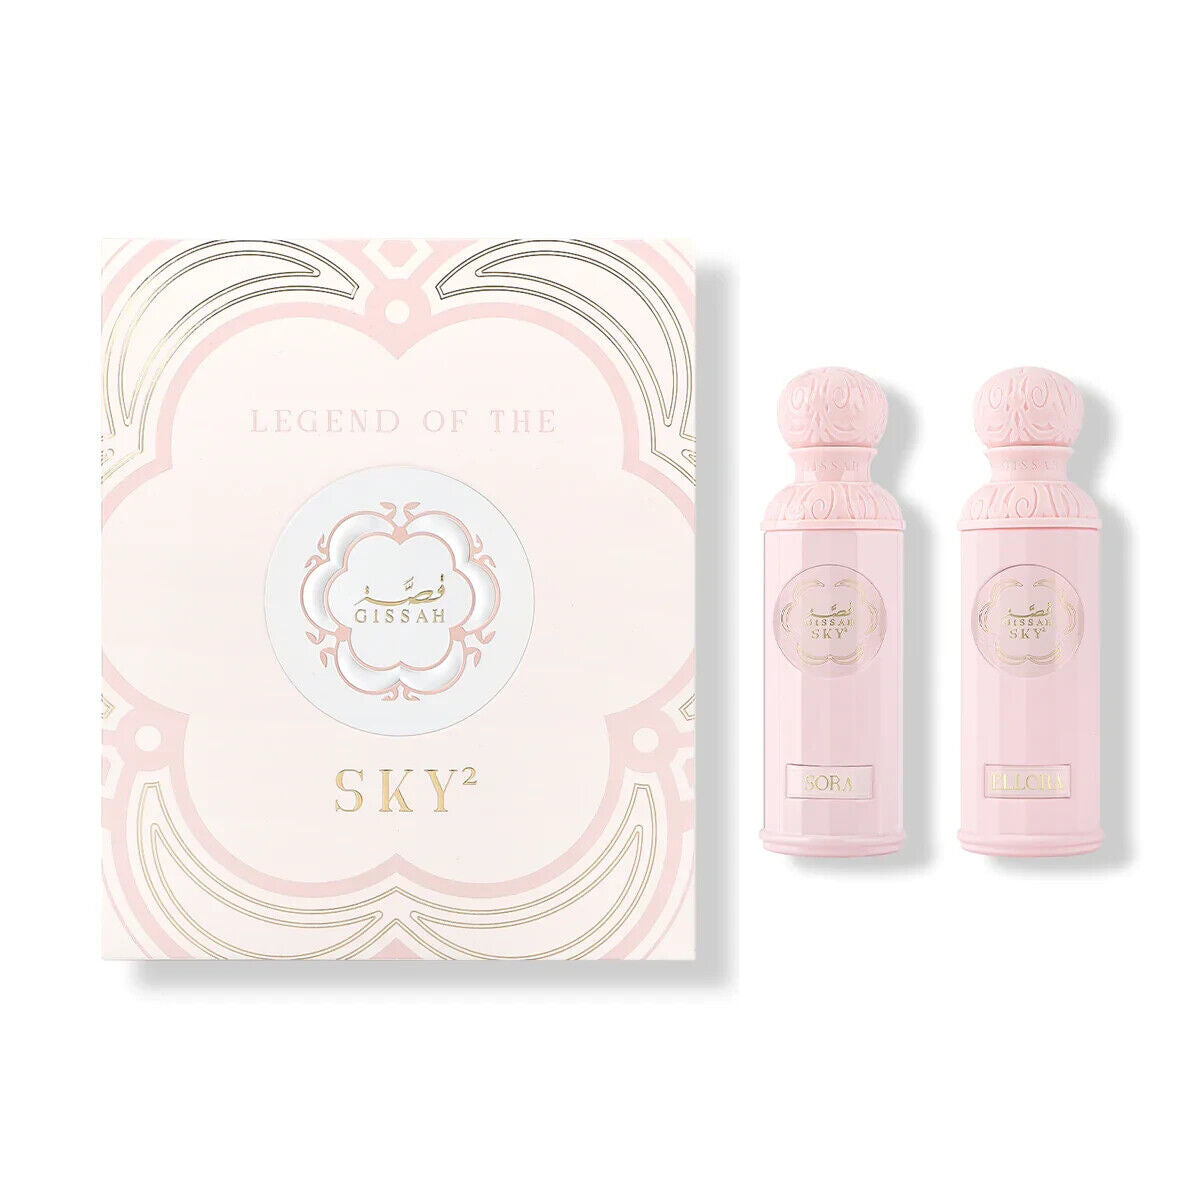 The image showcases the "Legend of the Sky²" perfume set for her by Gissah, with two bottles named "Sora" and "Ellora." The set is presented in front of a pastel pink box with a delicate gold and white design. The box has the collection name and the Gissah logo printed in the center. The perfume bottles are a soft pink color with ornate silver caps and central medallions that contain the name "Gissah Sky." The bottles' designs are elegant and feminine.